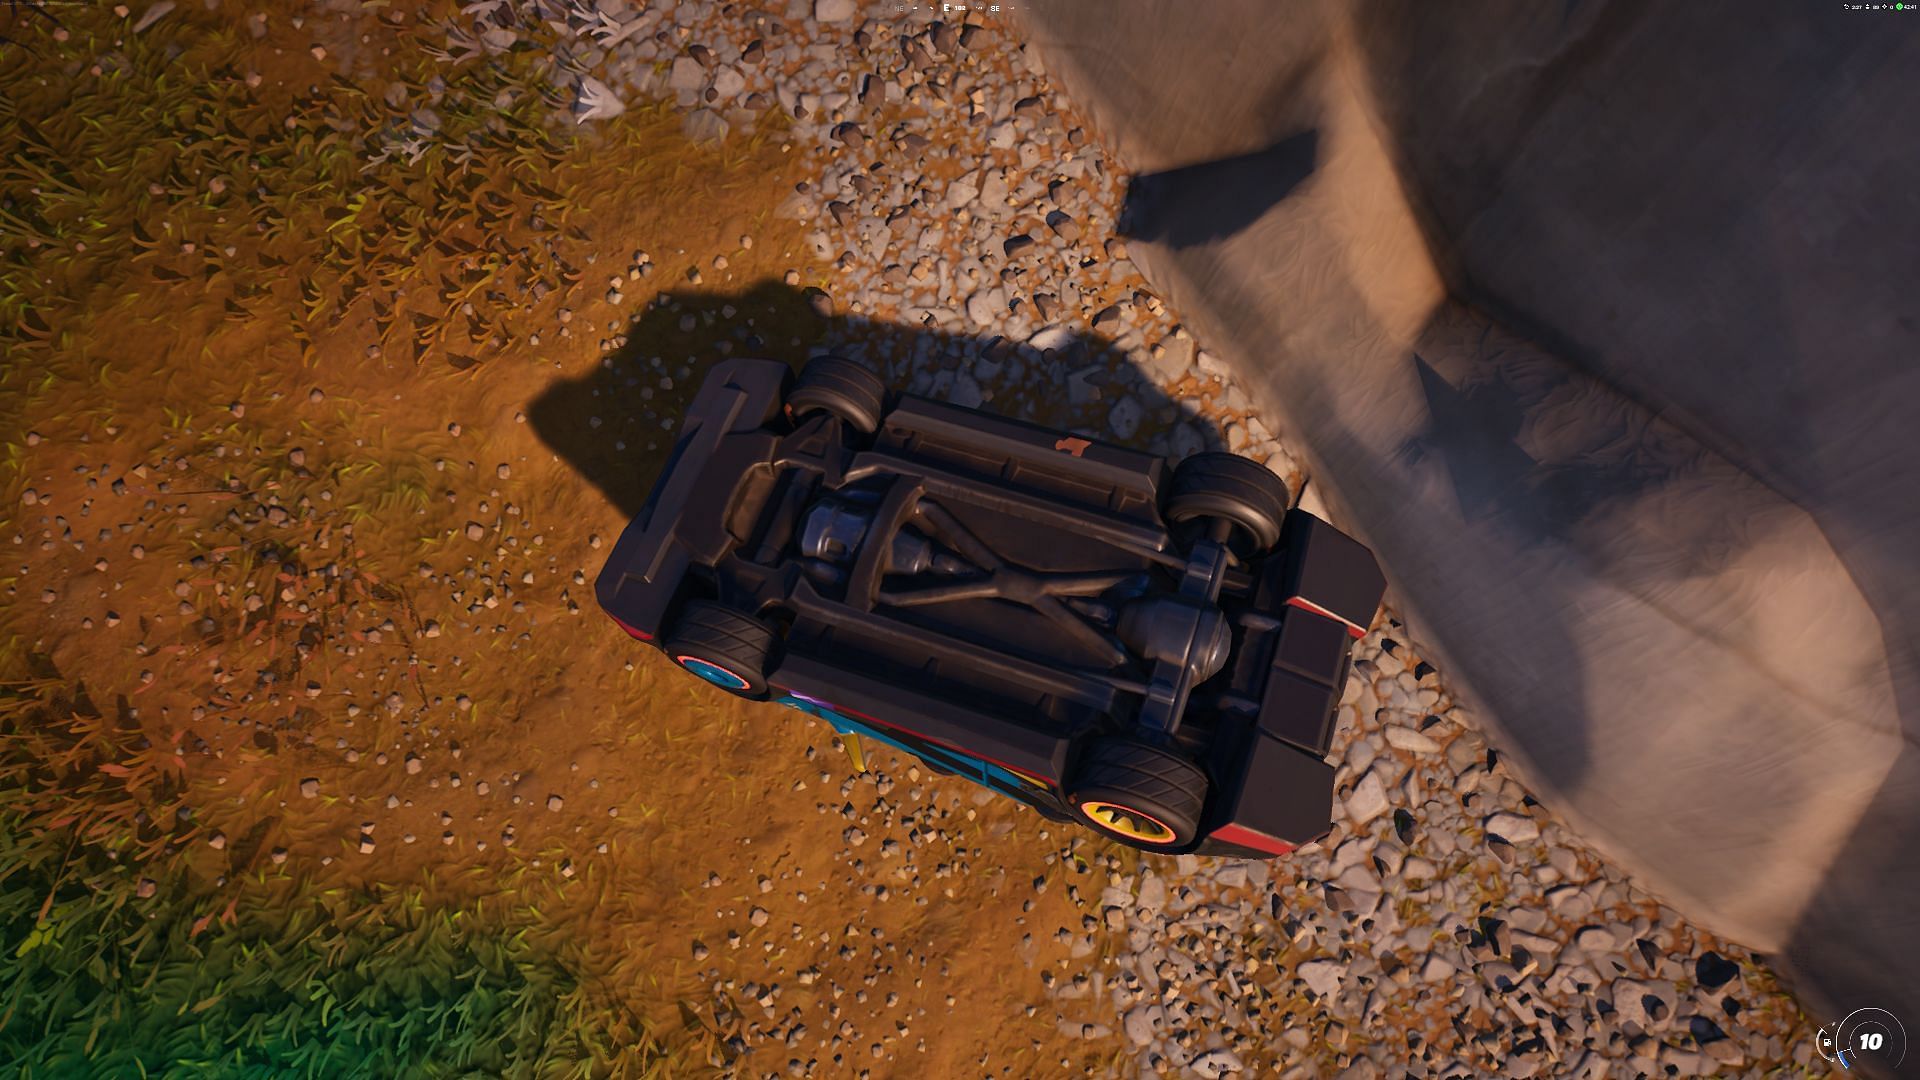 Flipping vehicles in Fortnite is tough work (Image via Epic Games/Fortnite)